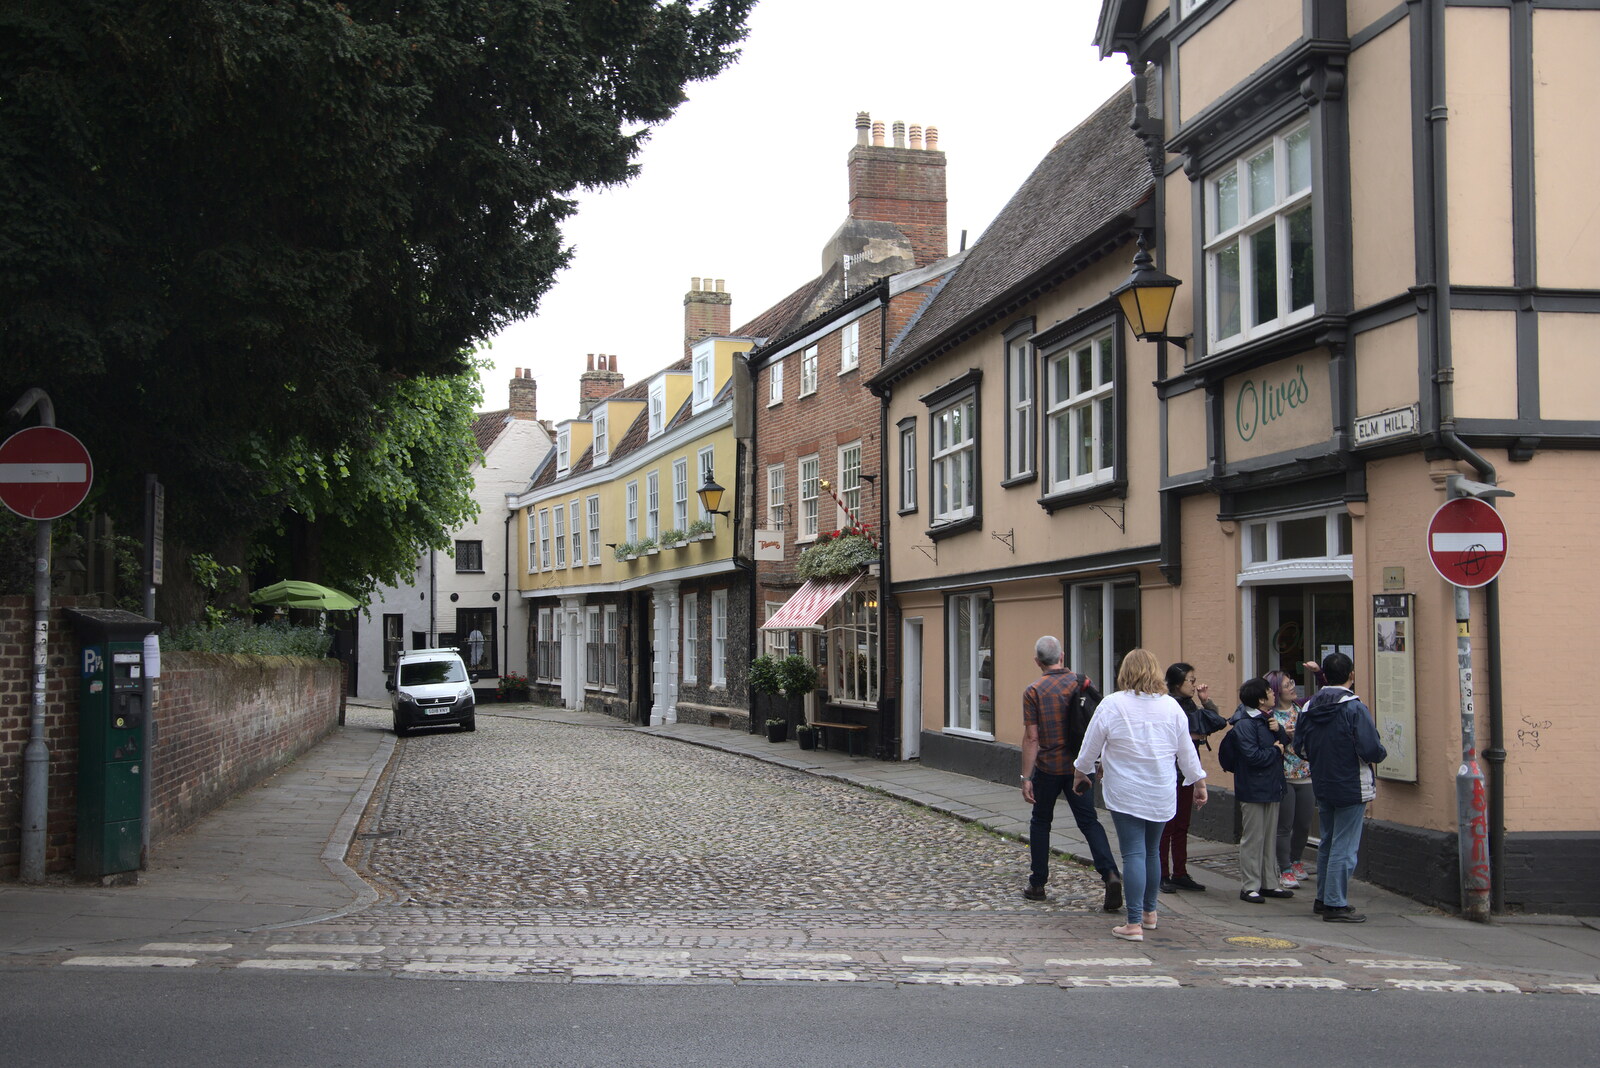 The bottom end of Elm Hill from Discovering the Hidden City: Norwich, Norfolk - 23rd May 2022